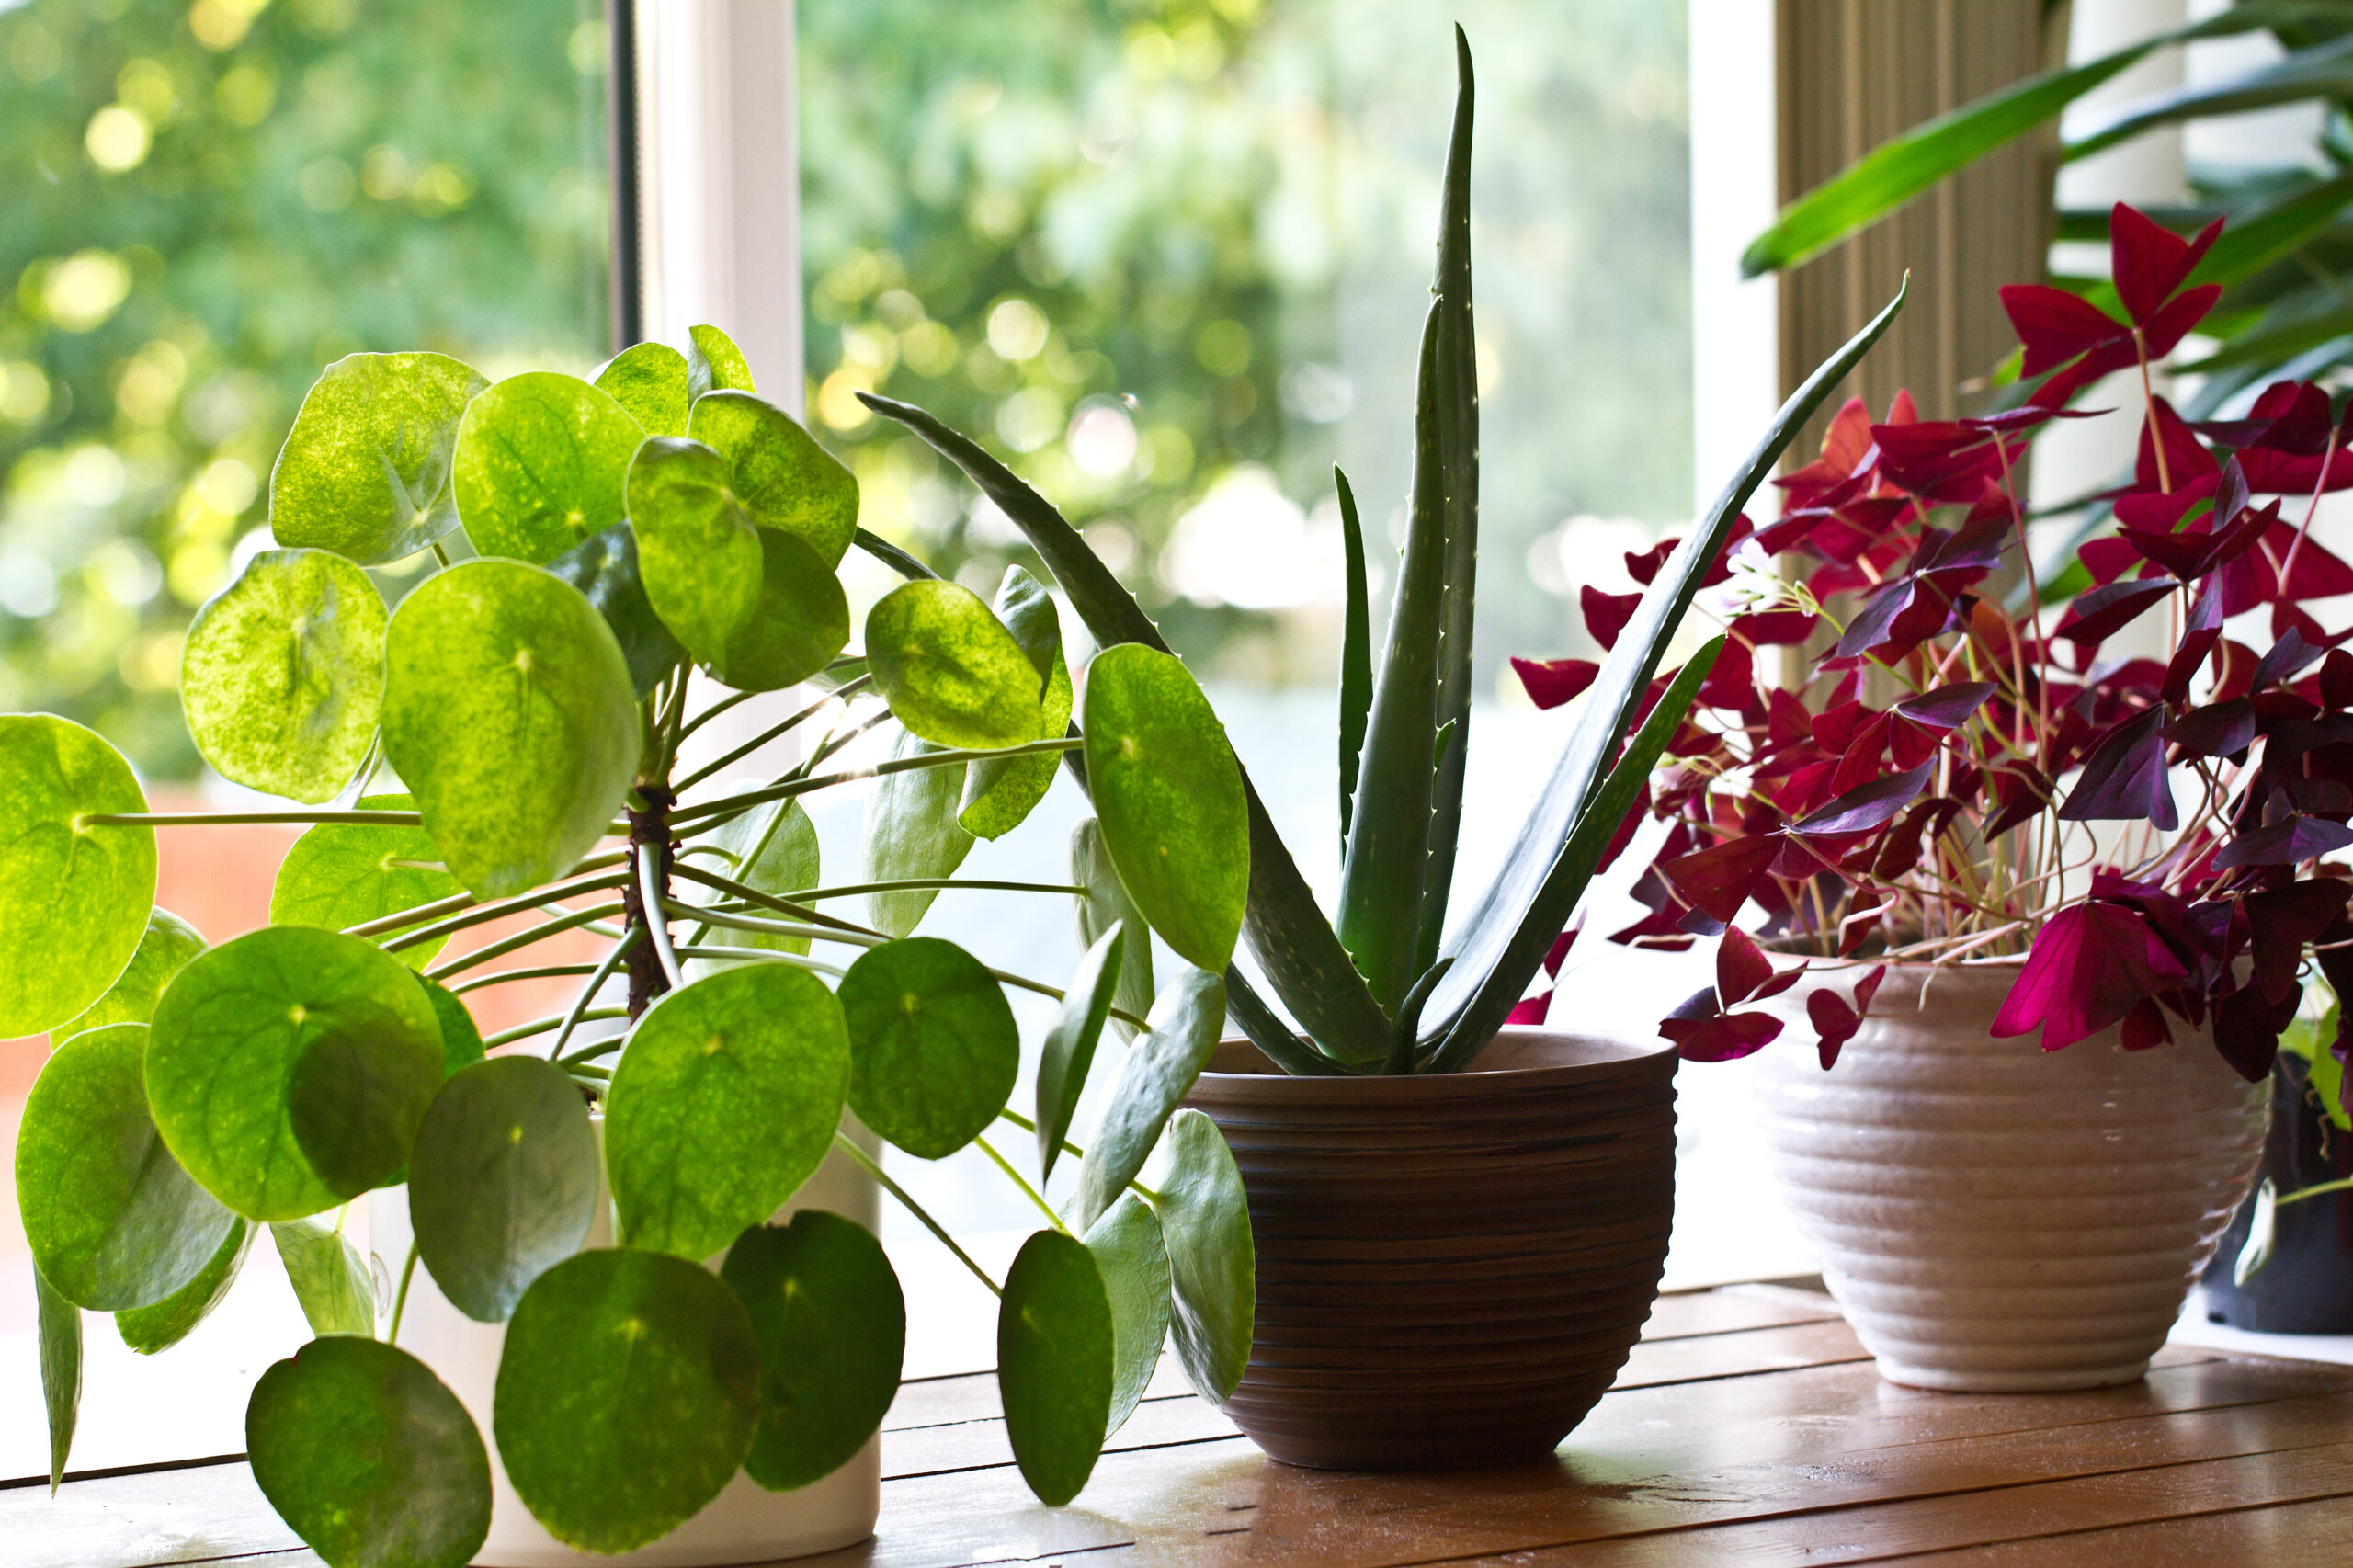 Owning houseplants can boost your mental health – here’s how to pick the right one